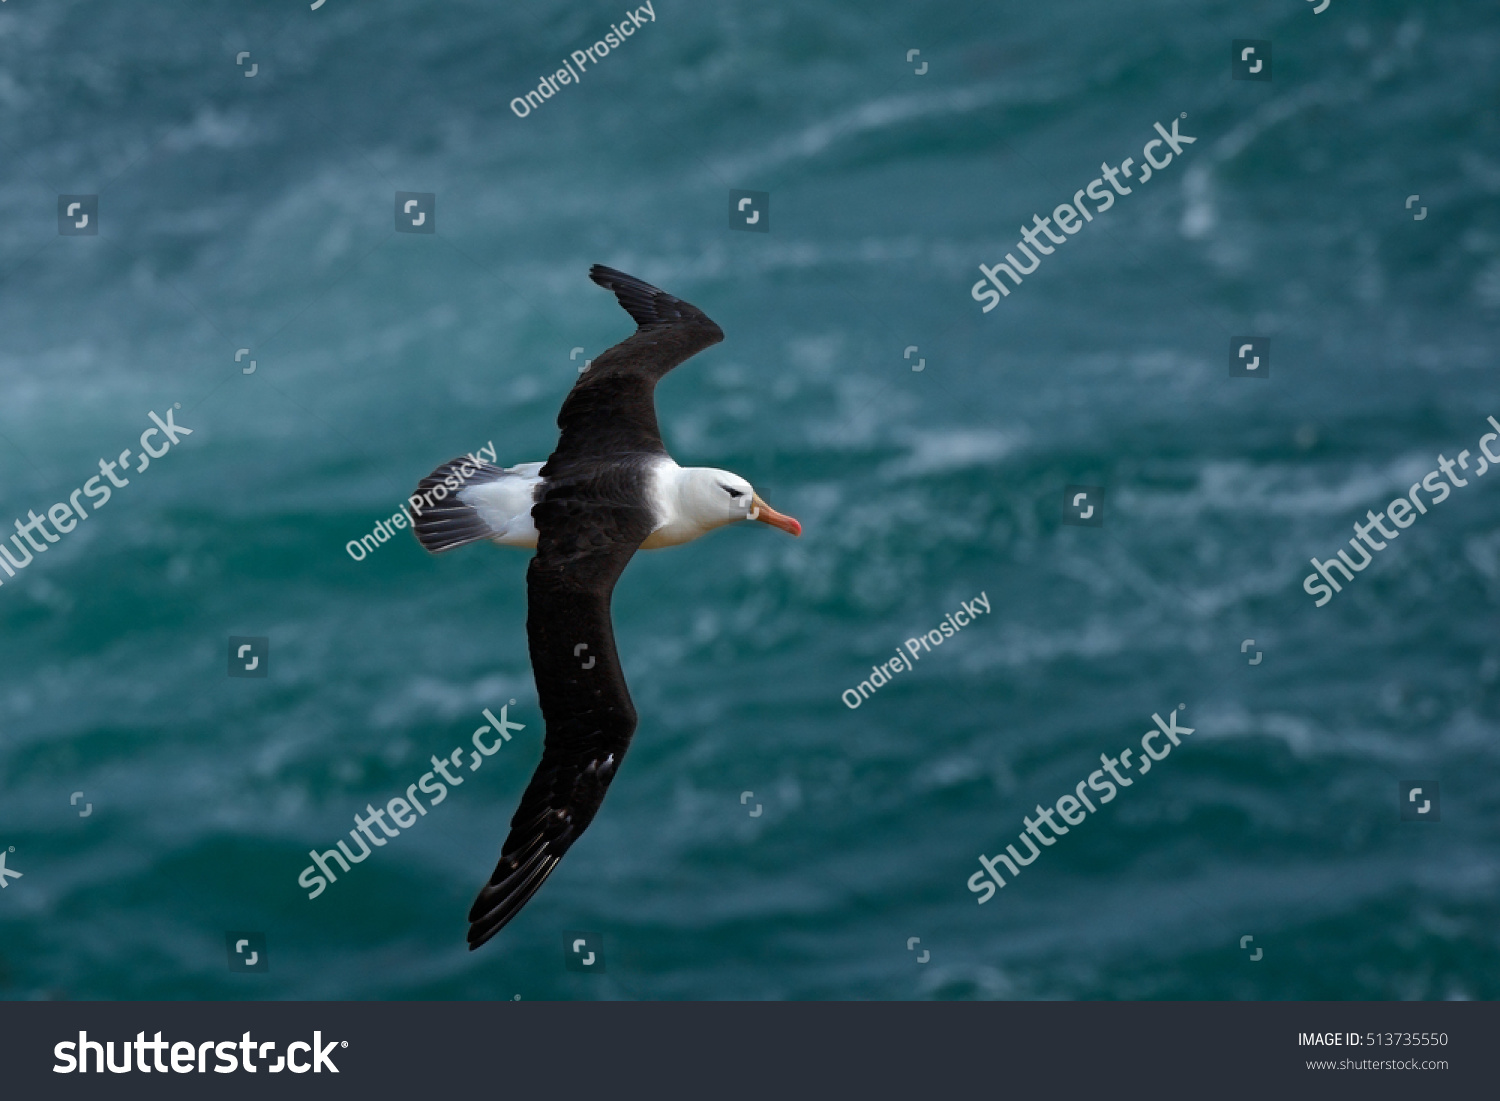 Black-browed albatross, Thalassarche melanophris, with waves in the Atlantic ocean, on the Falkland Islands. Action wildlife scene from the Antarctic nature. #513735550